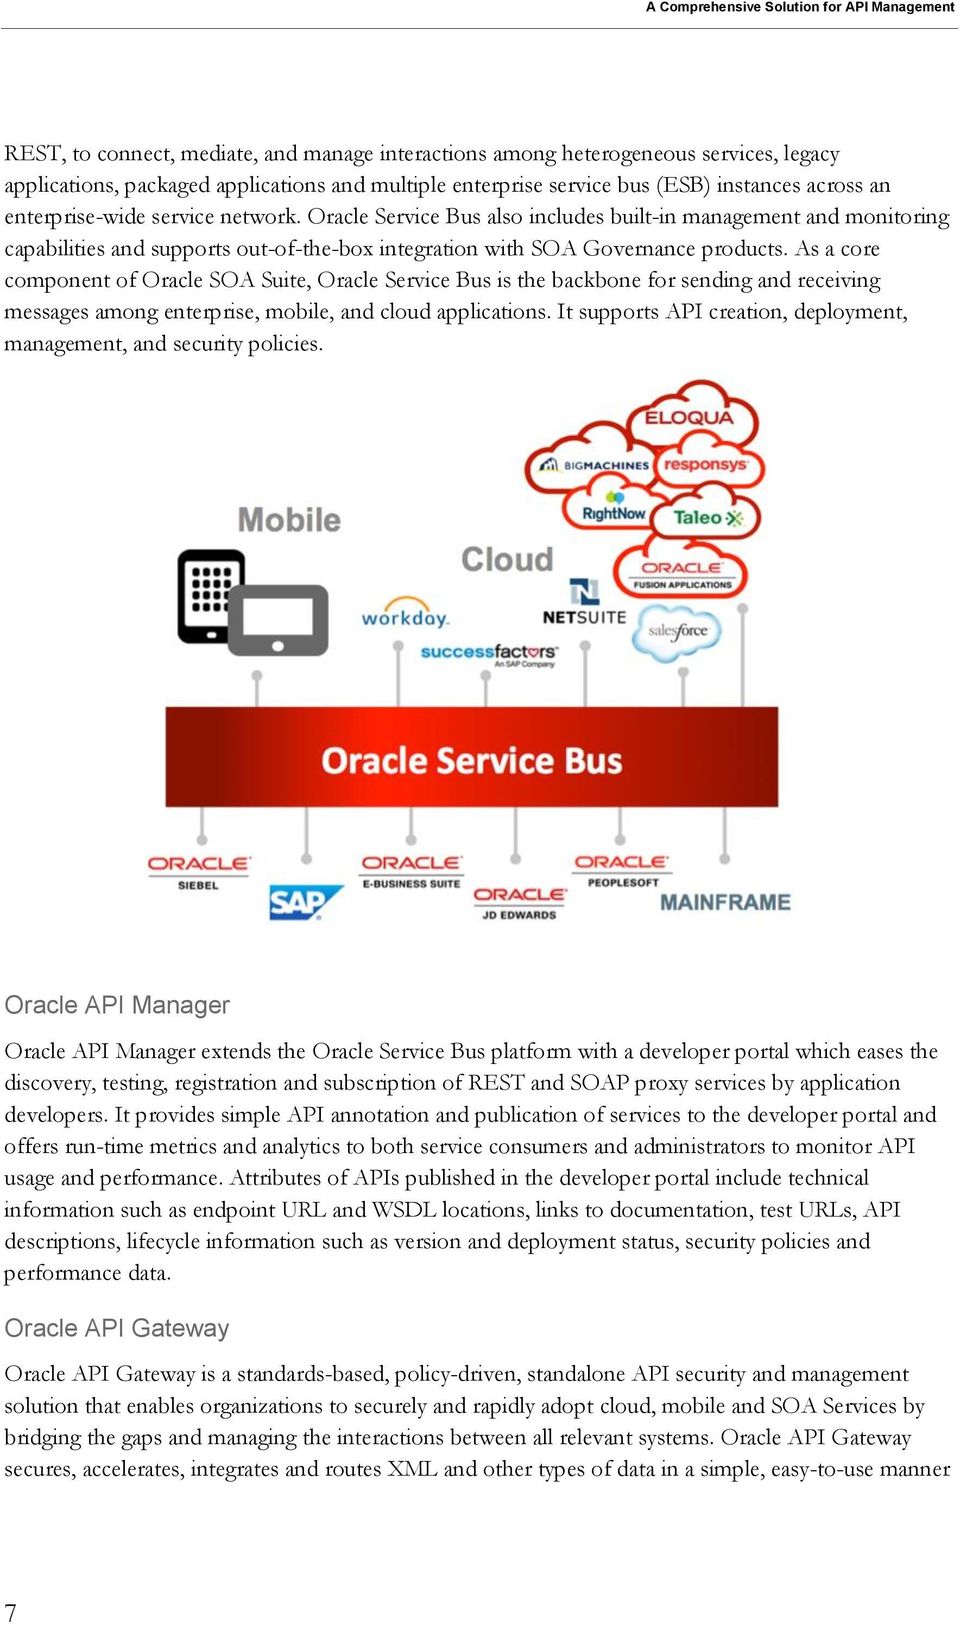 As a core component of Oracle SOA Suite, Oracle Service Bus is the backbone for sending and receiving messages among enterprise, mobile, and cloud applications.